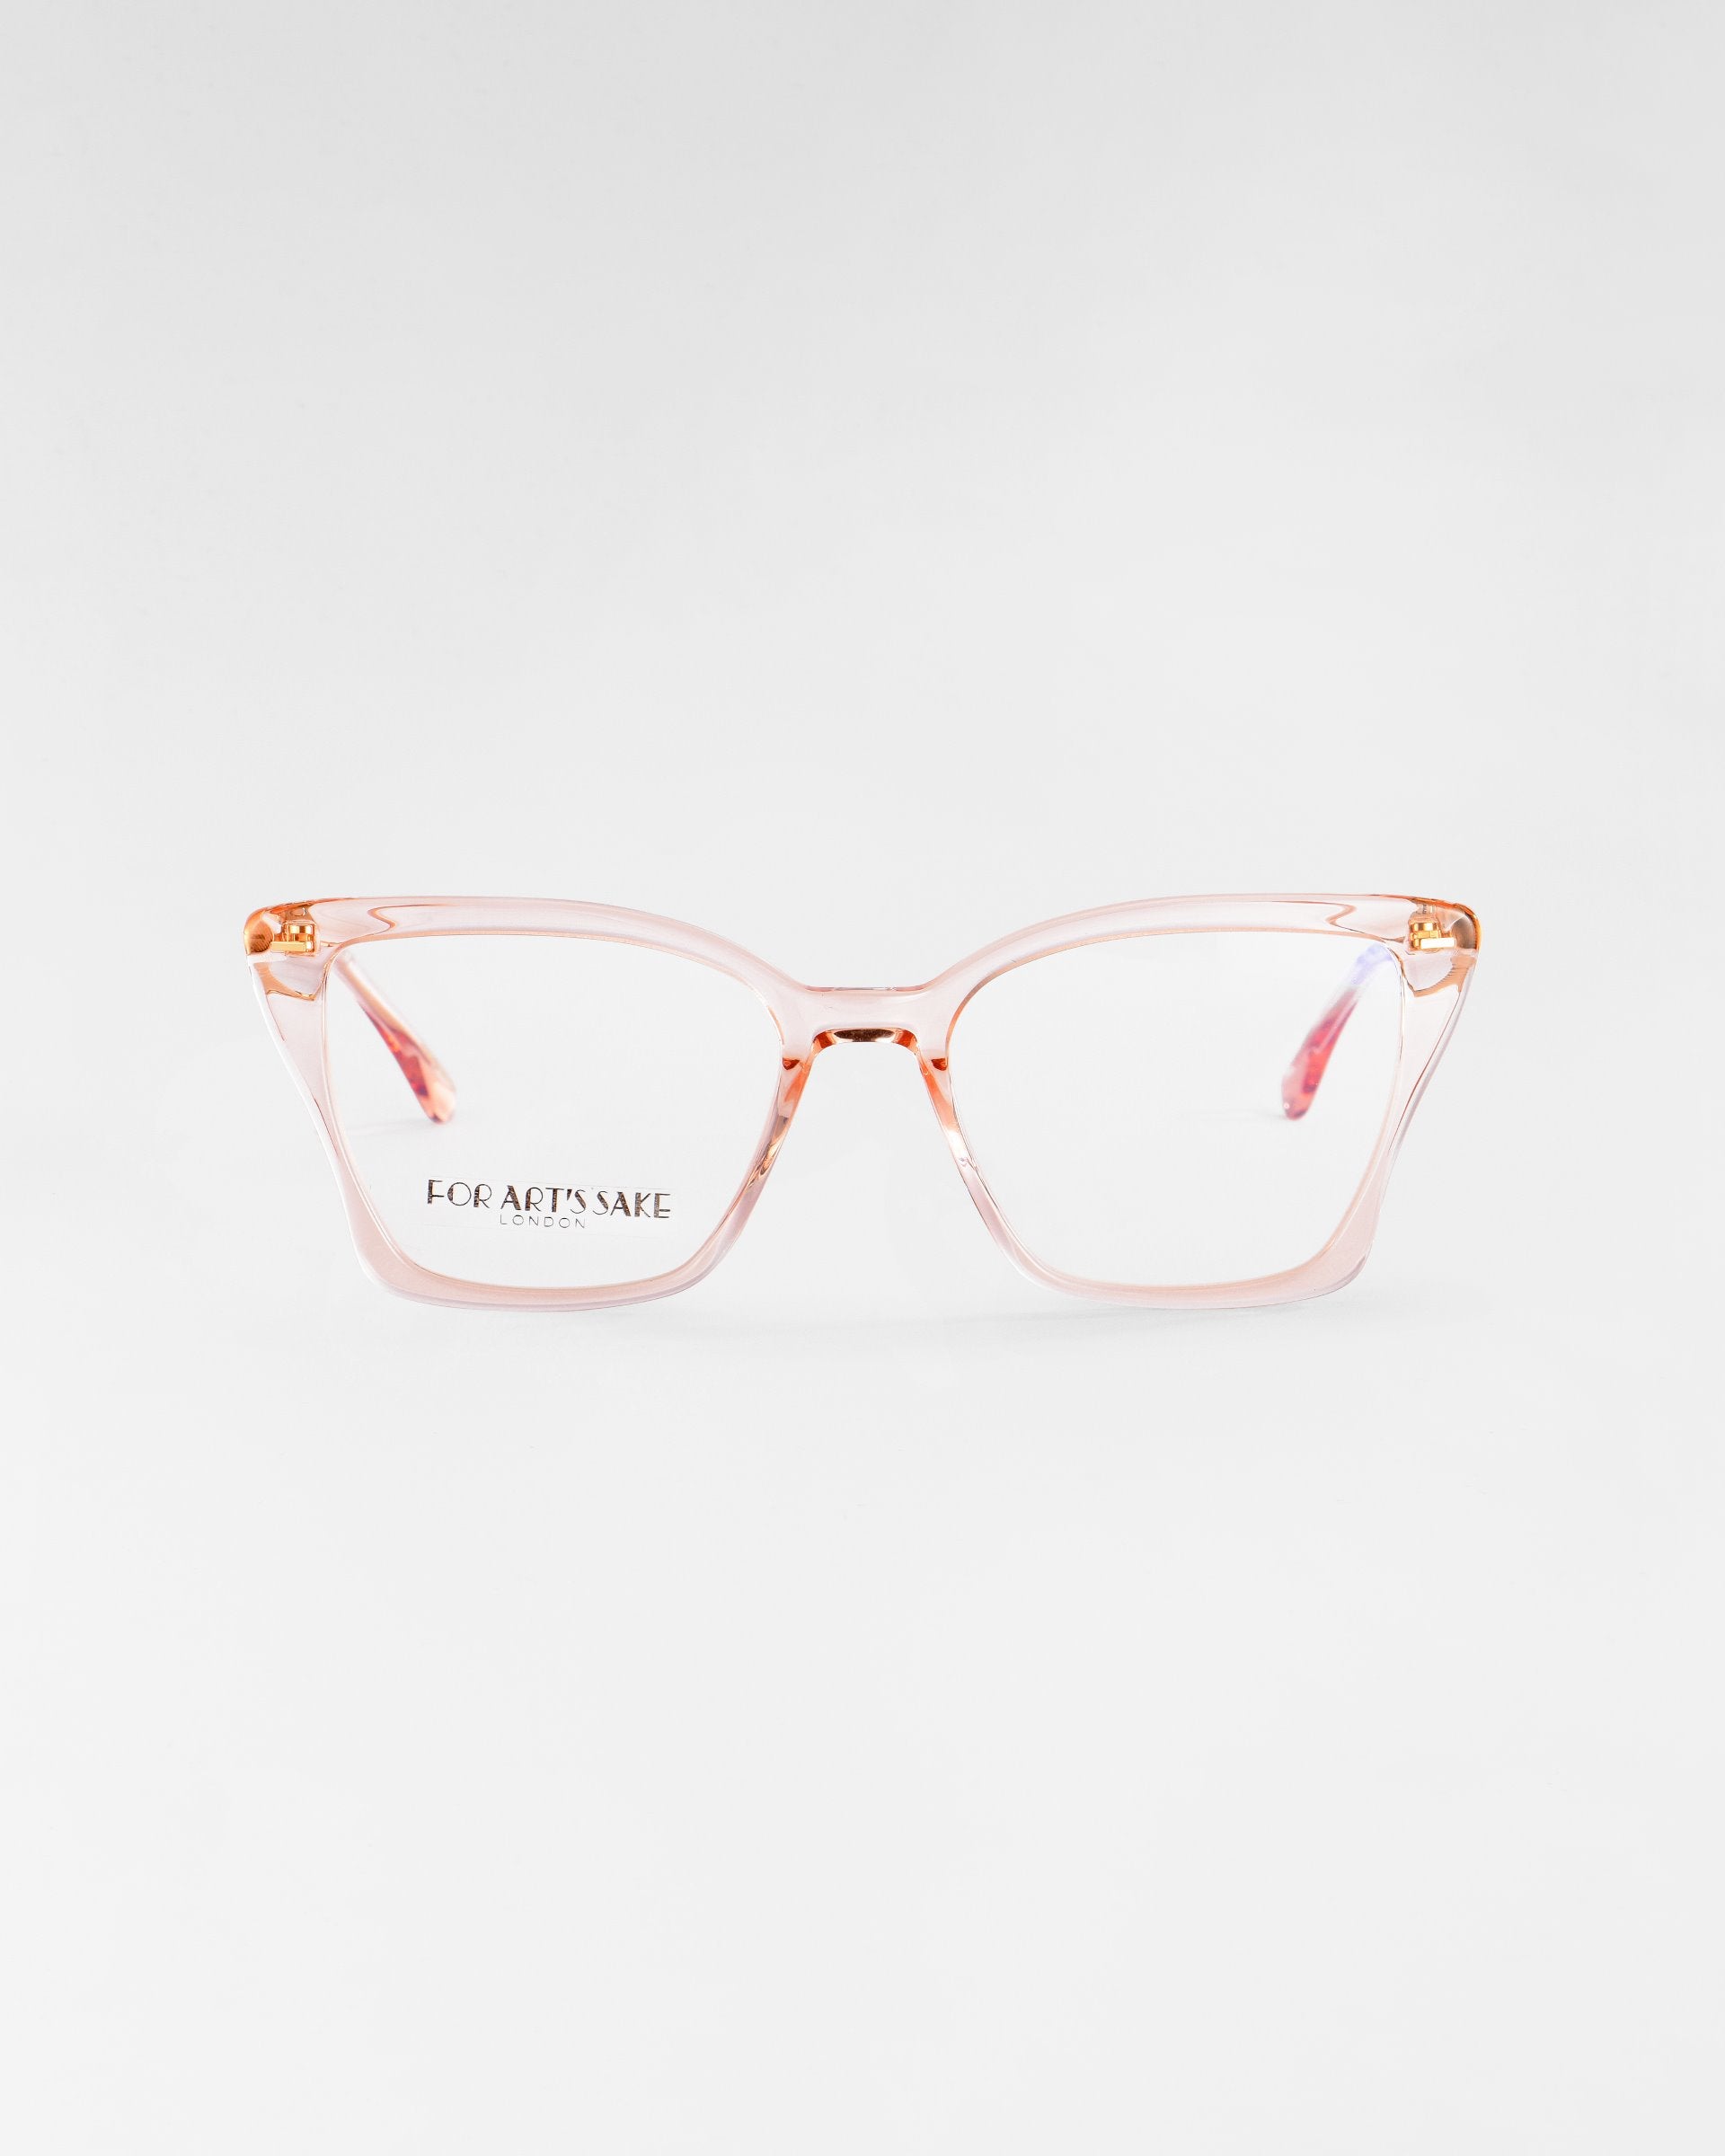 A pair of transparent pink, square-shaped eyeglasses, featuring UV Protection Lenses, is displayed against a plain white background. The product is the Dion by For Art's Sake®.